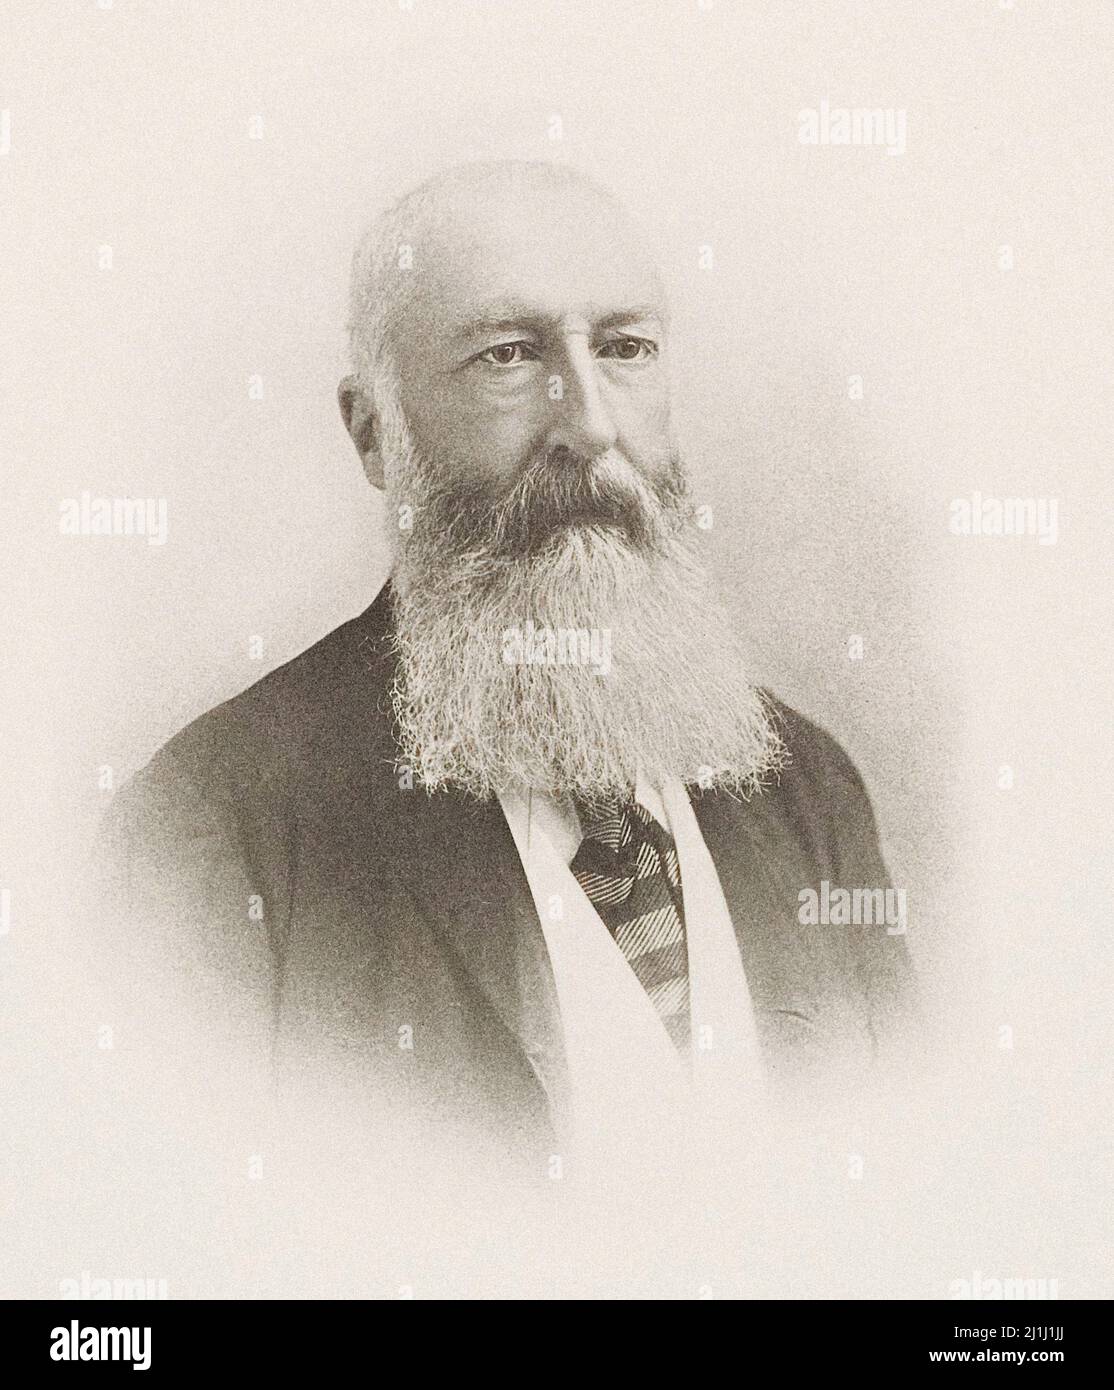 Portrait of Leopold II of Belgium. Leopold II (1835 – 1909) was the second King of the Belgians from 1865 to 1909 and, through his own efforts, the ow Stock Photo